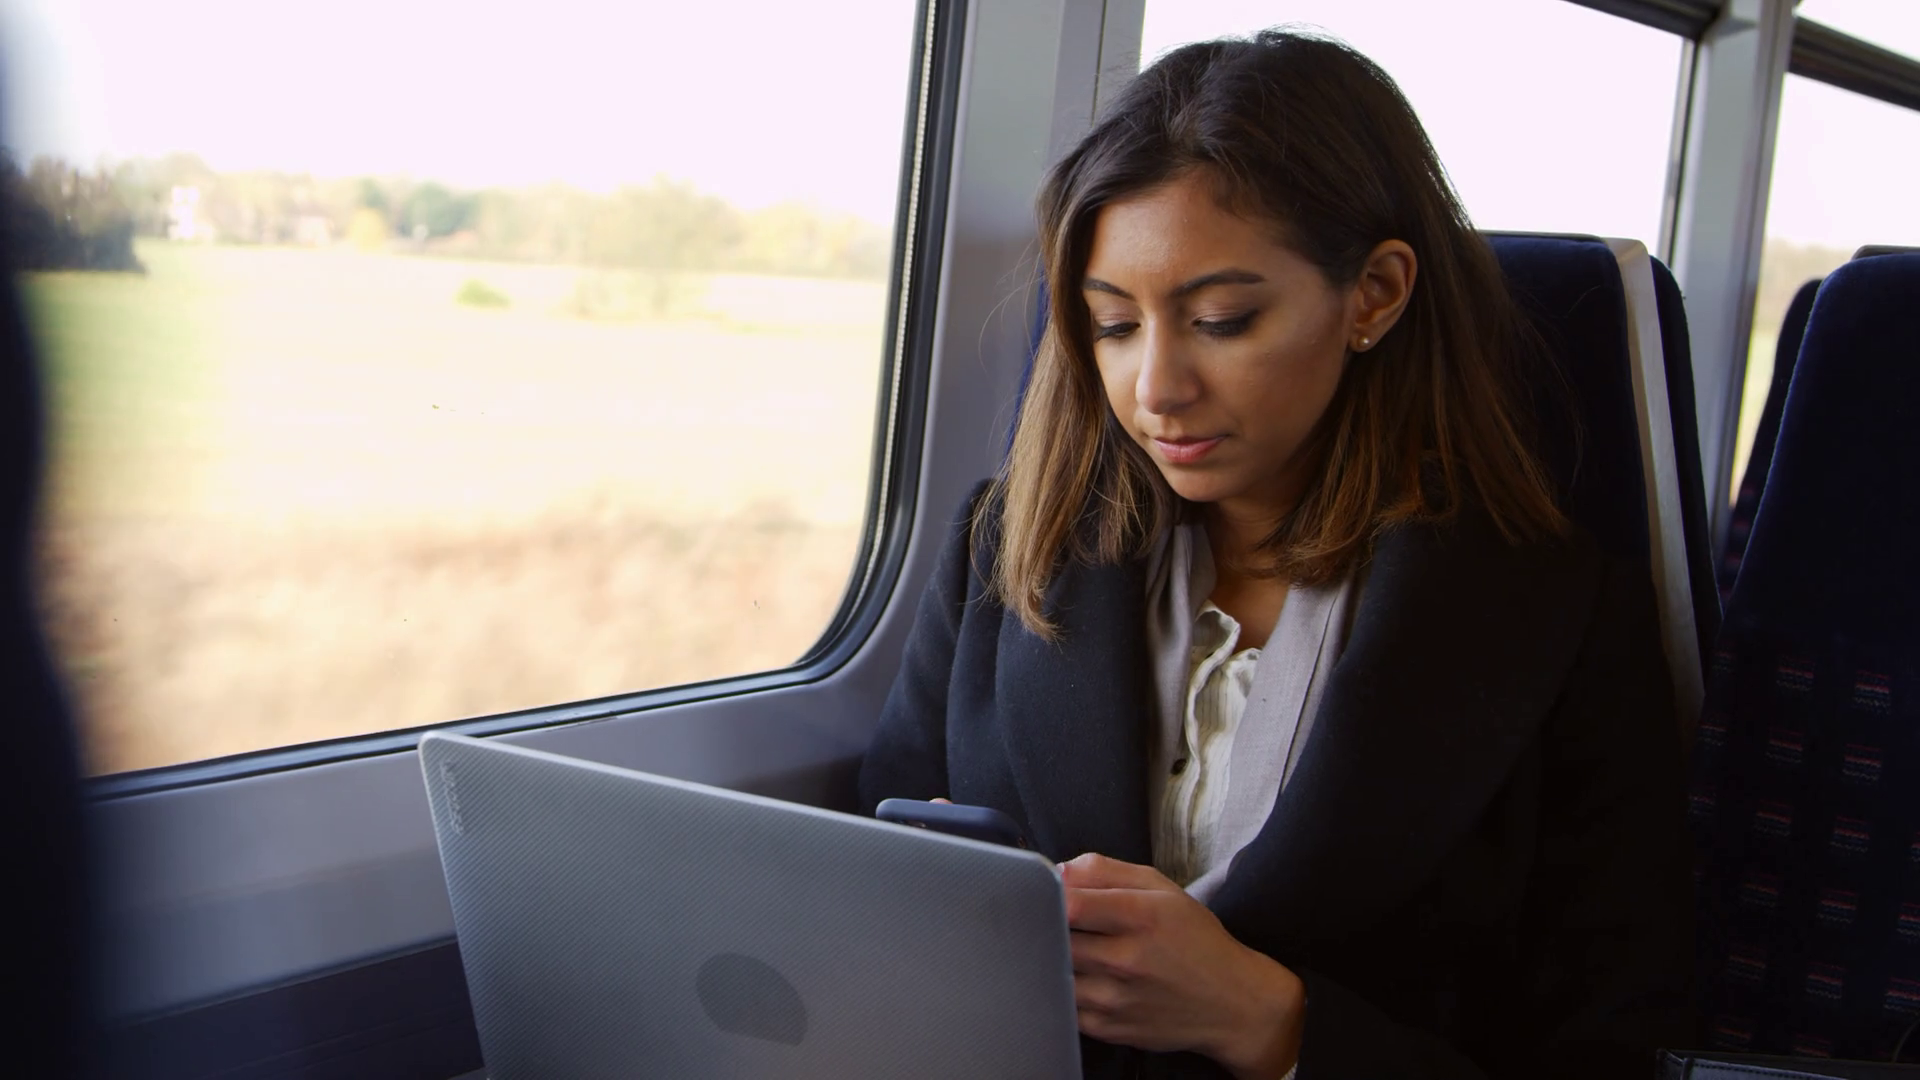 Laptop on a train, using tech on the go